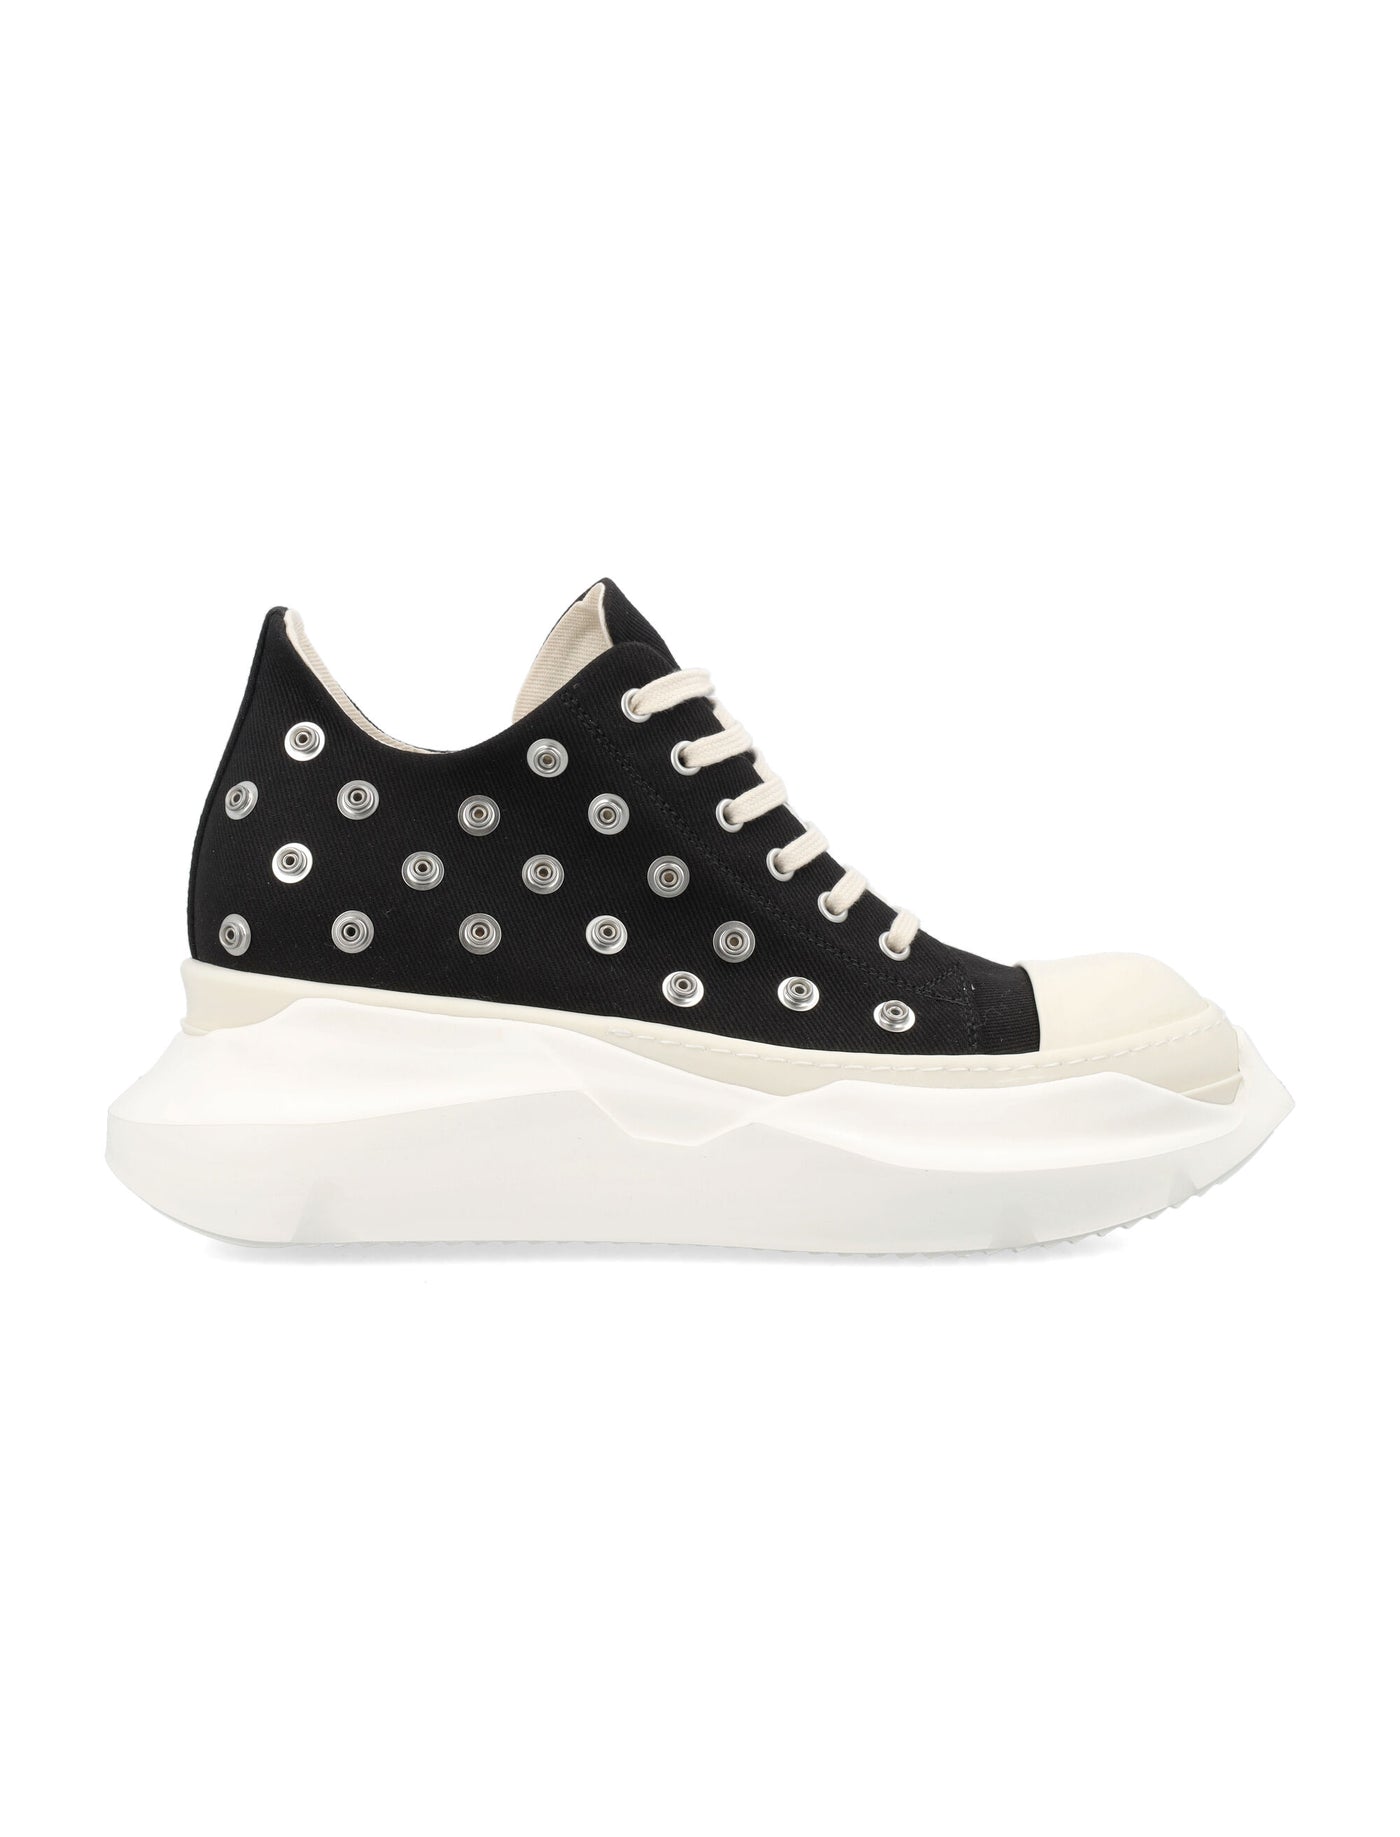 911 DRKSHDW ABSTRACT LOW SNEAK STUDDED